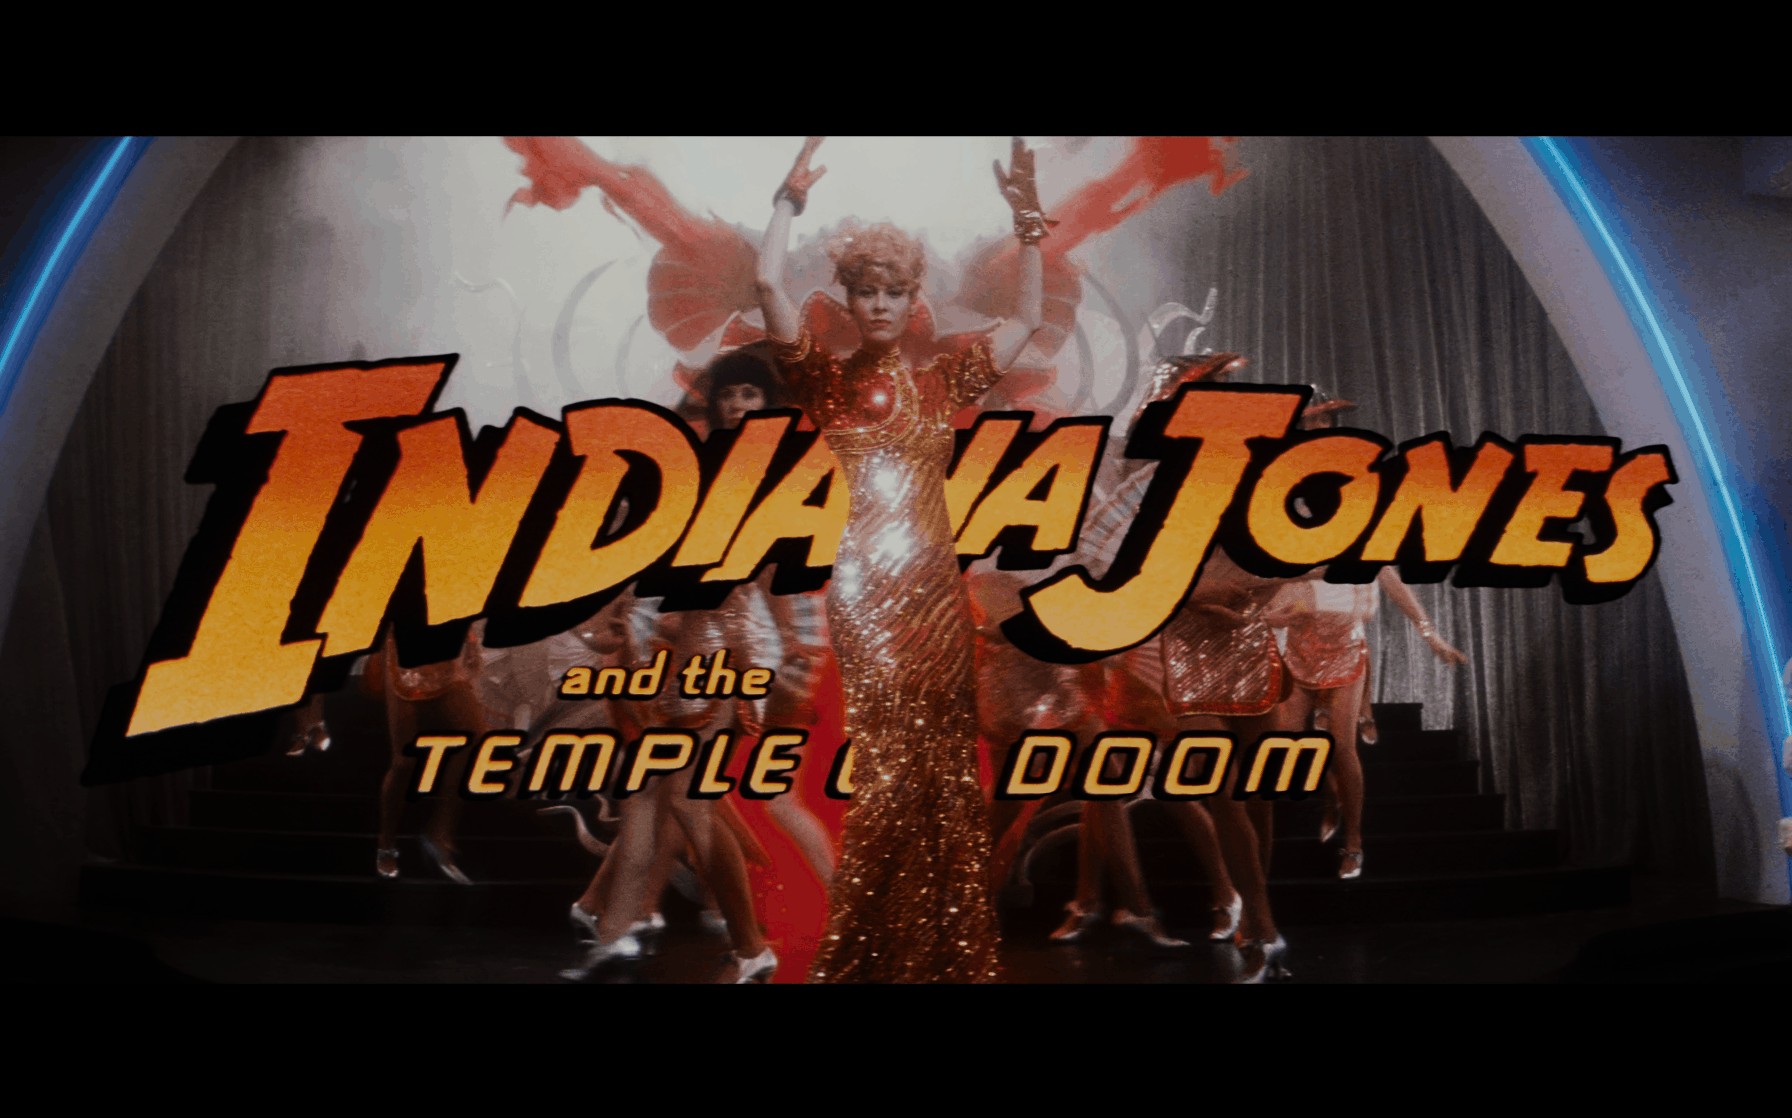 Indiana Jones and the Temple of Doom title